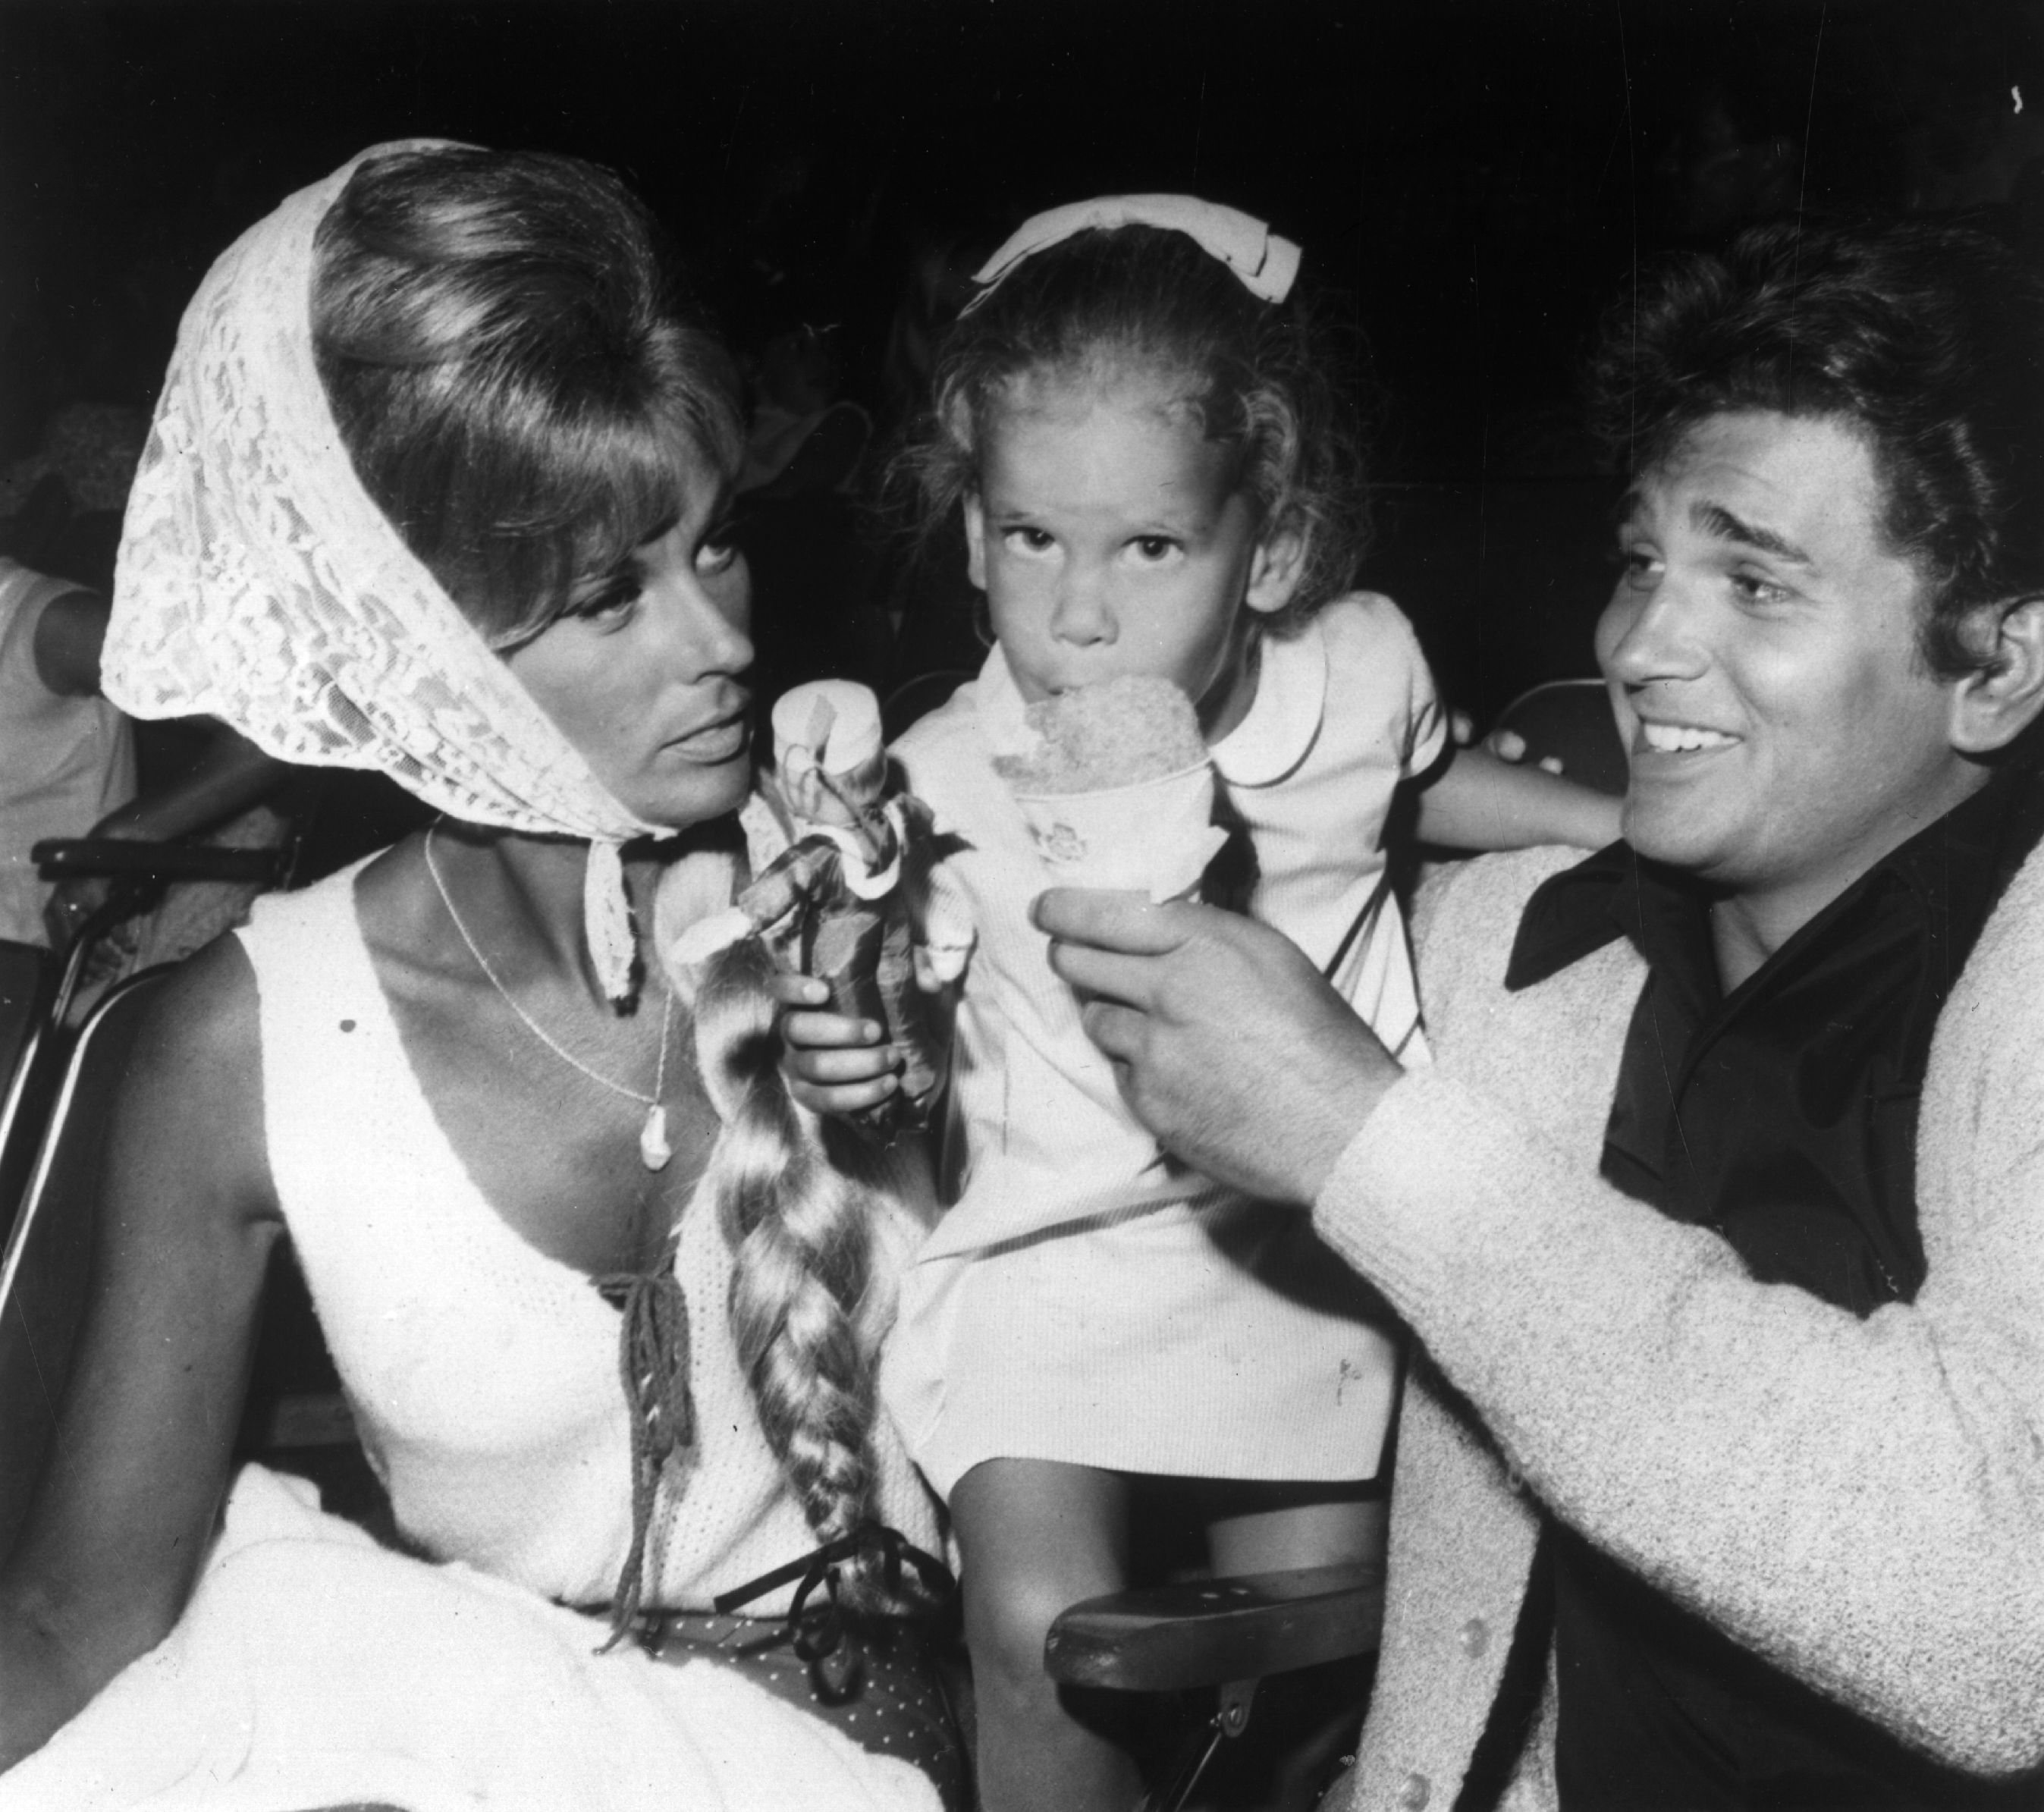 Michael Landon, who plays a leading role in the TV series 'Bonanza', with his wife Lynn and their young daughter in August 1965. | Source: Getty Images.